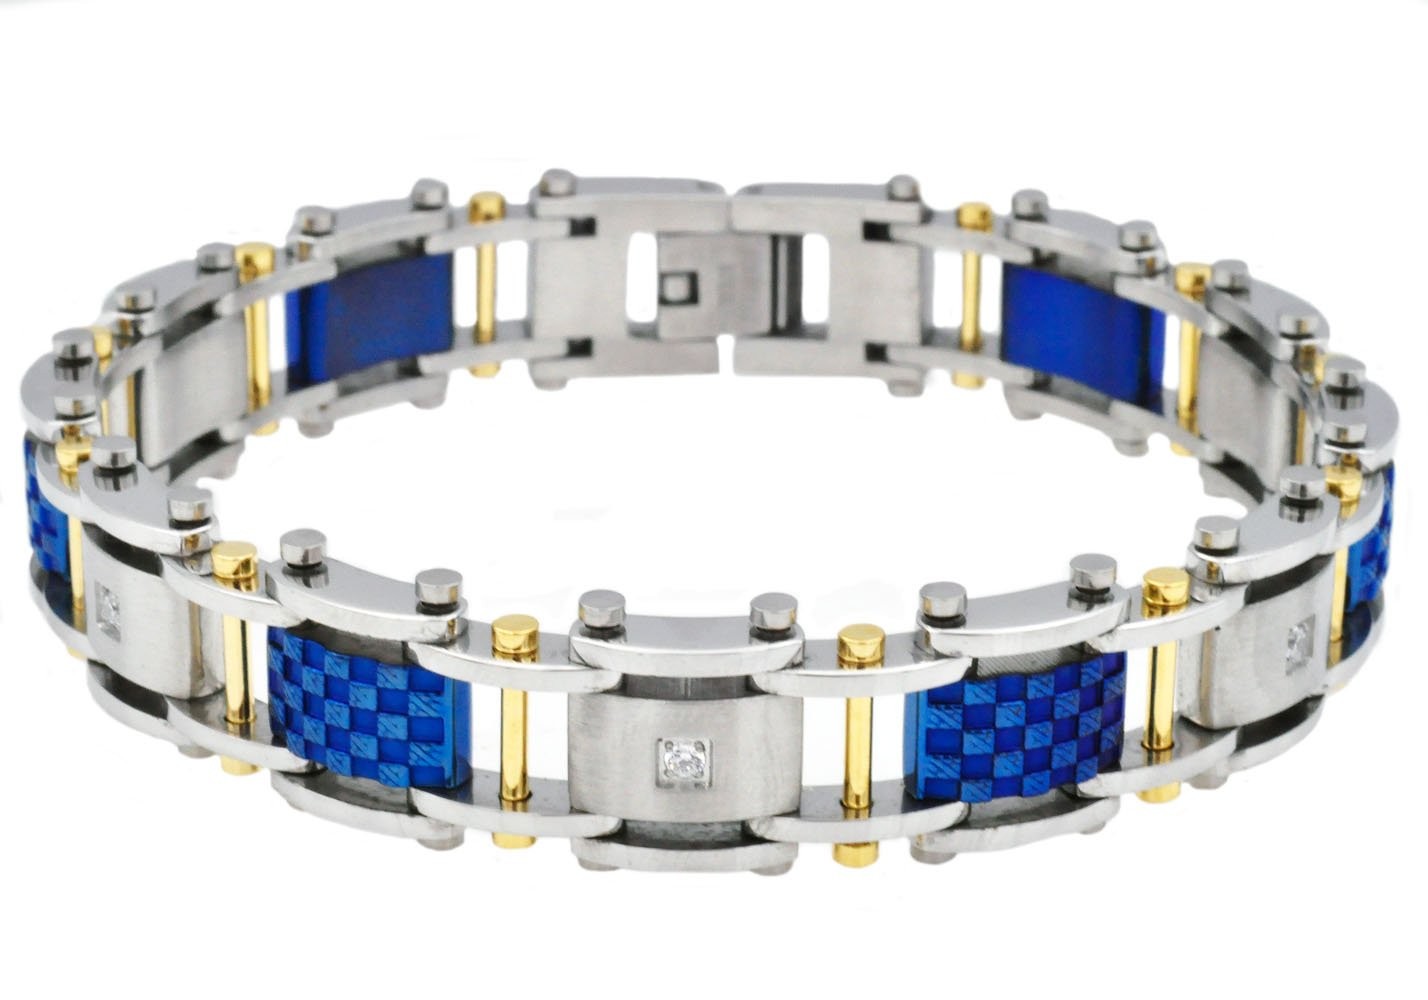 Stainless Steel Blue And Gold Men's Bracelet With Cubic Zirconia